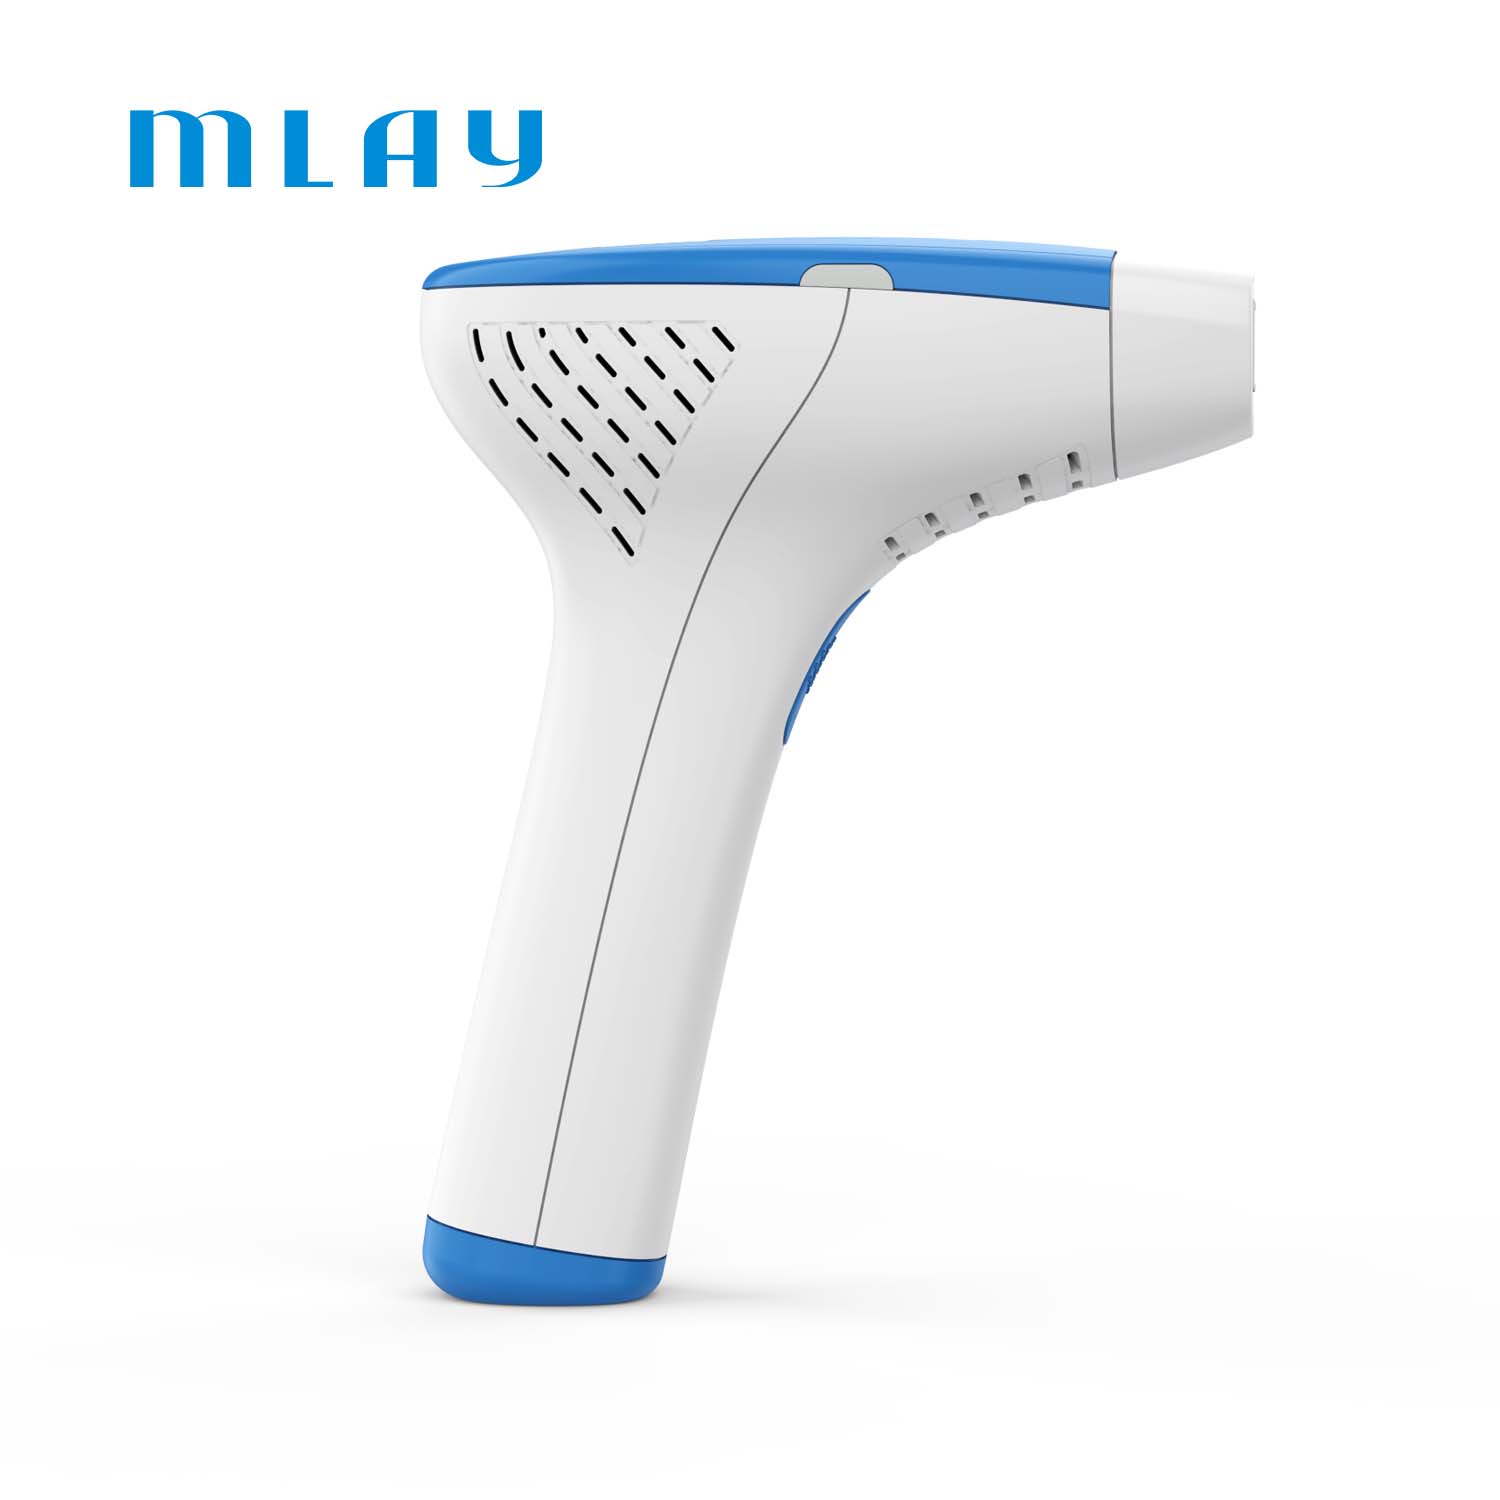 At home use mini permanent intense pulsed light ipl hair removal laser handset portable